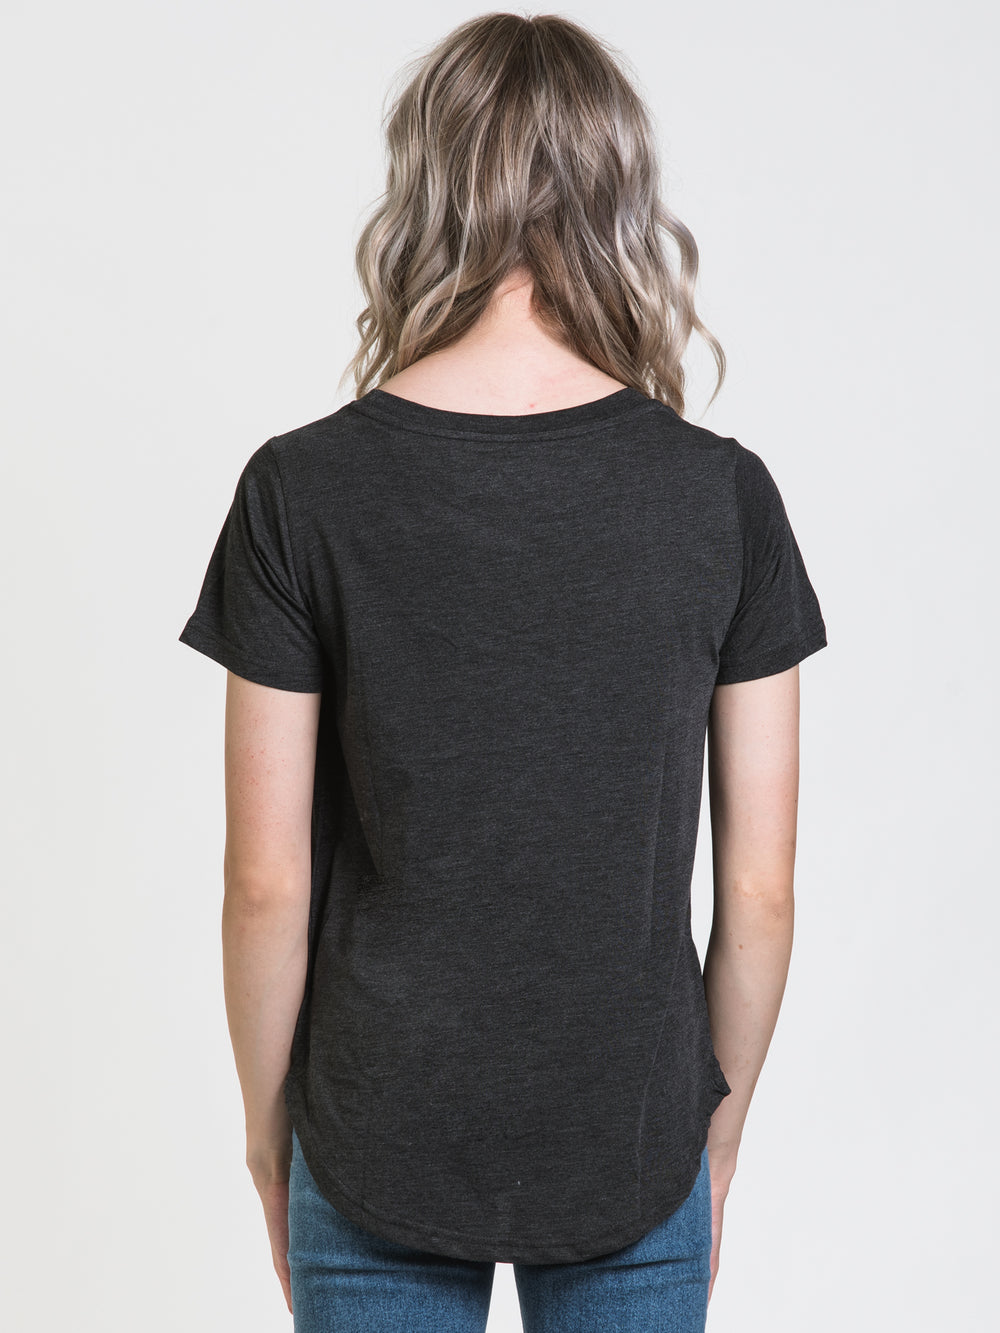 TENTREE LEFT CHEST JUNIPER POCKET TEE - CLEARANCE